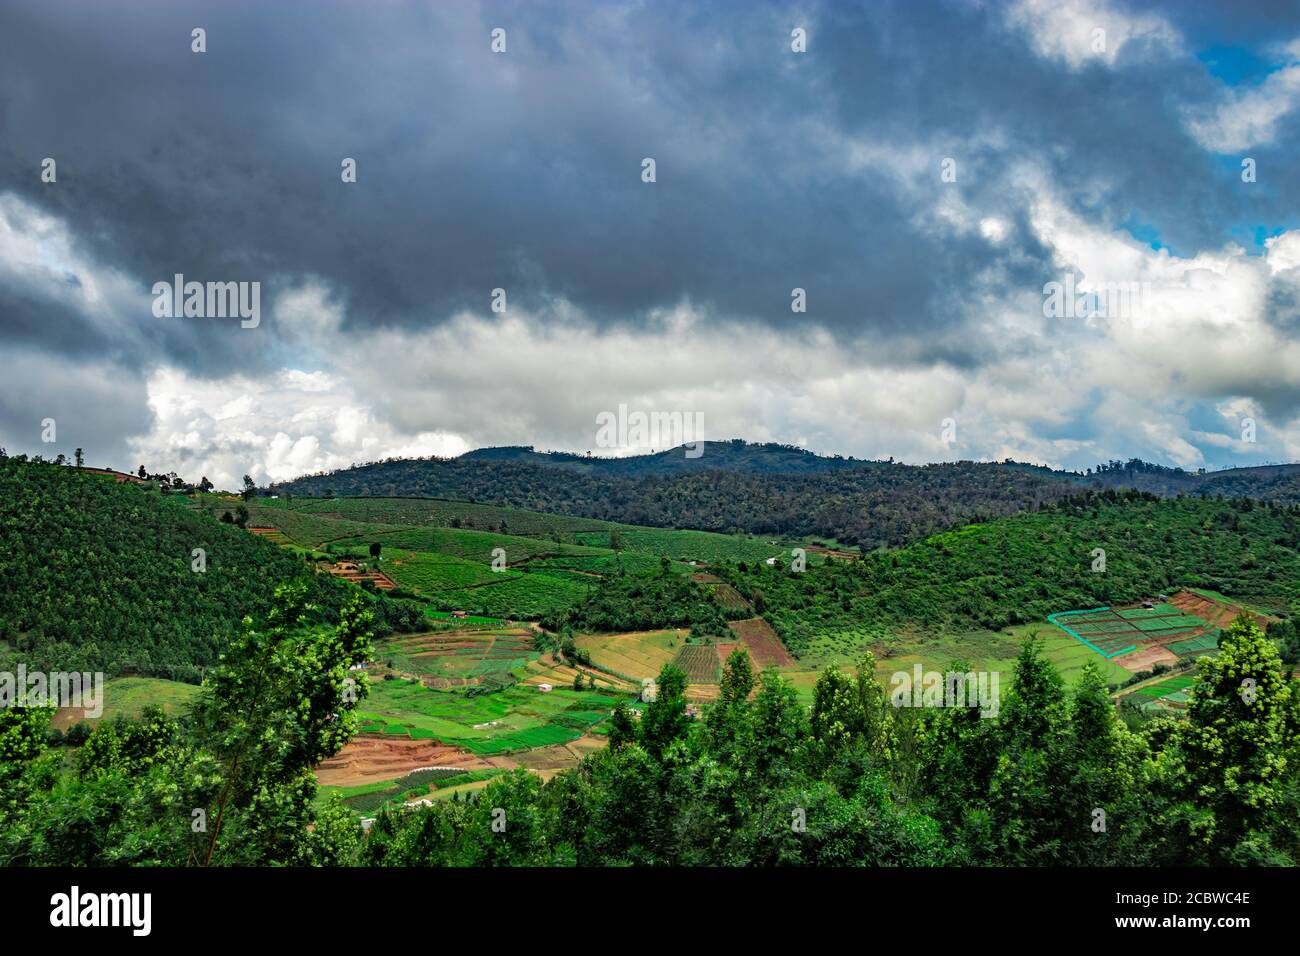 mountains covered with tea gardens and green forests image is taken at south india. it is showing the beautiful landscape of south india. Stock Photo